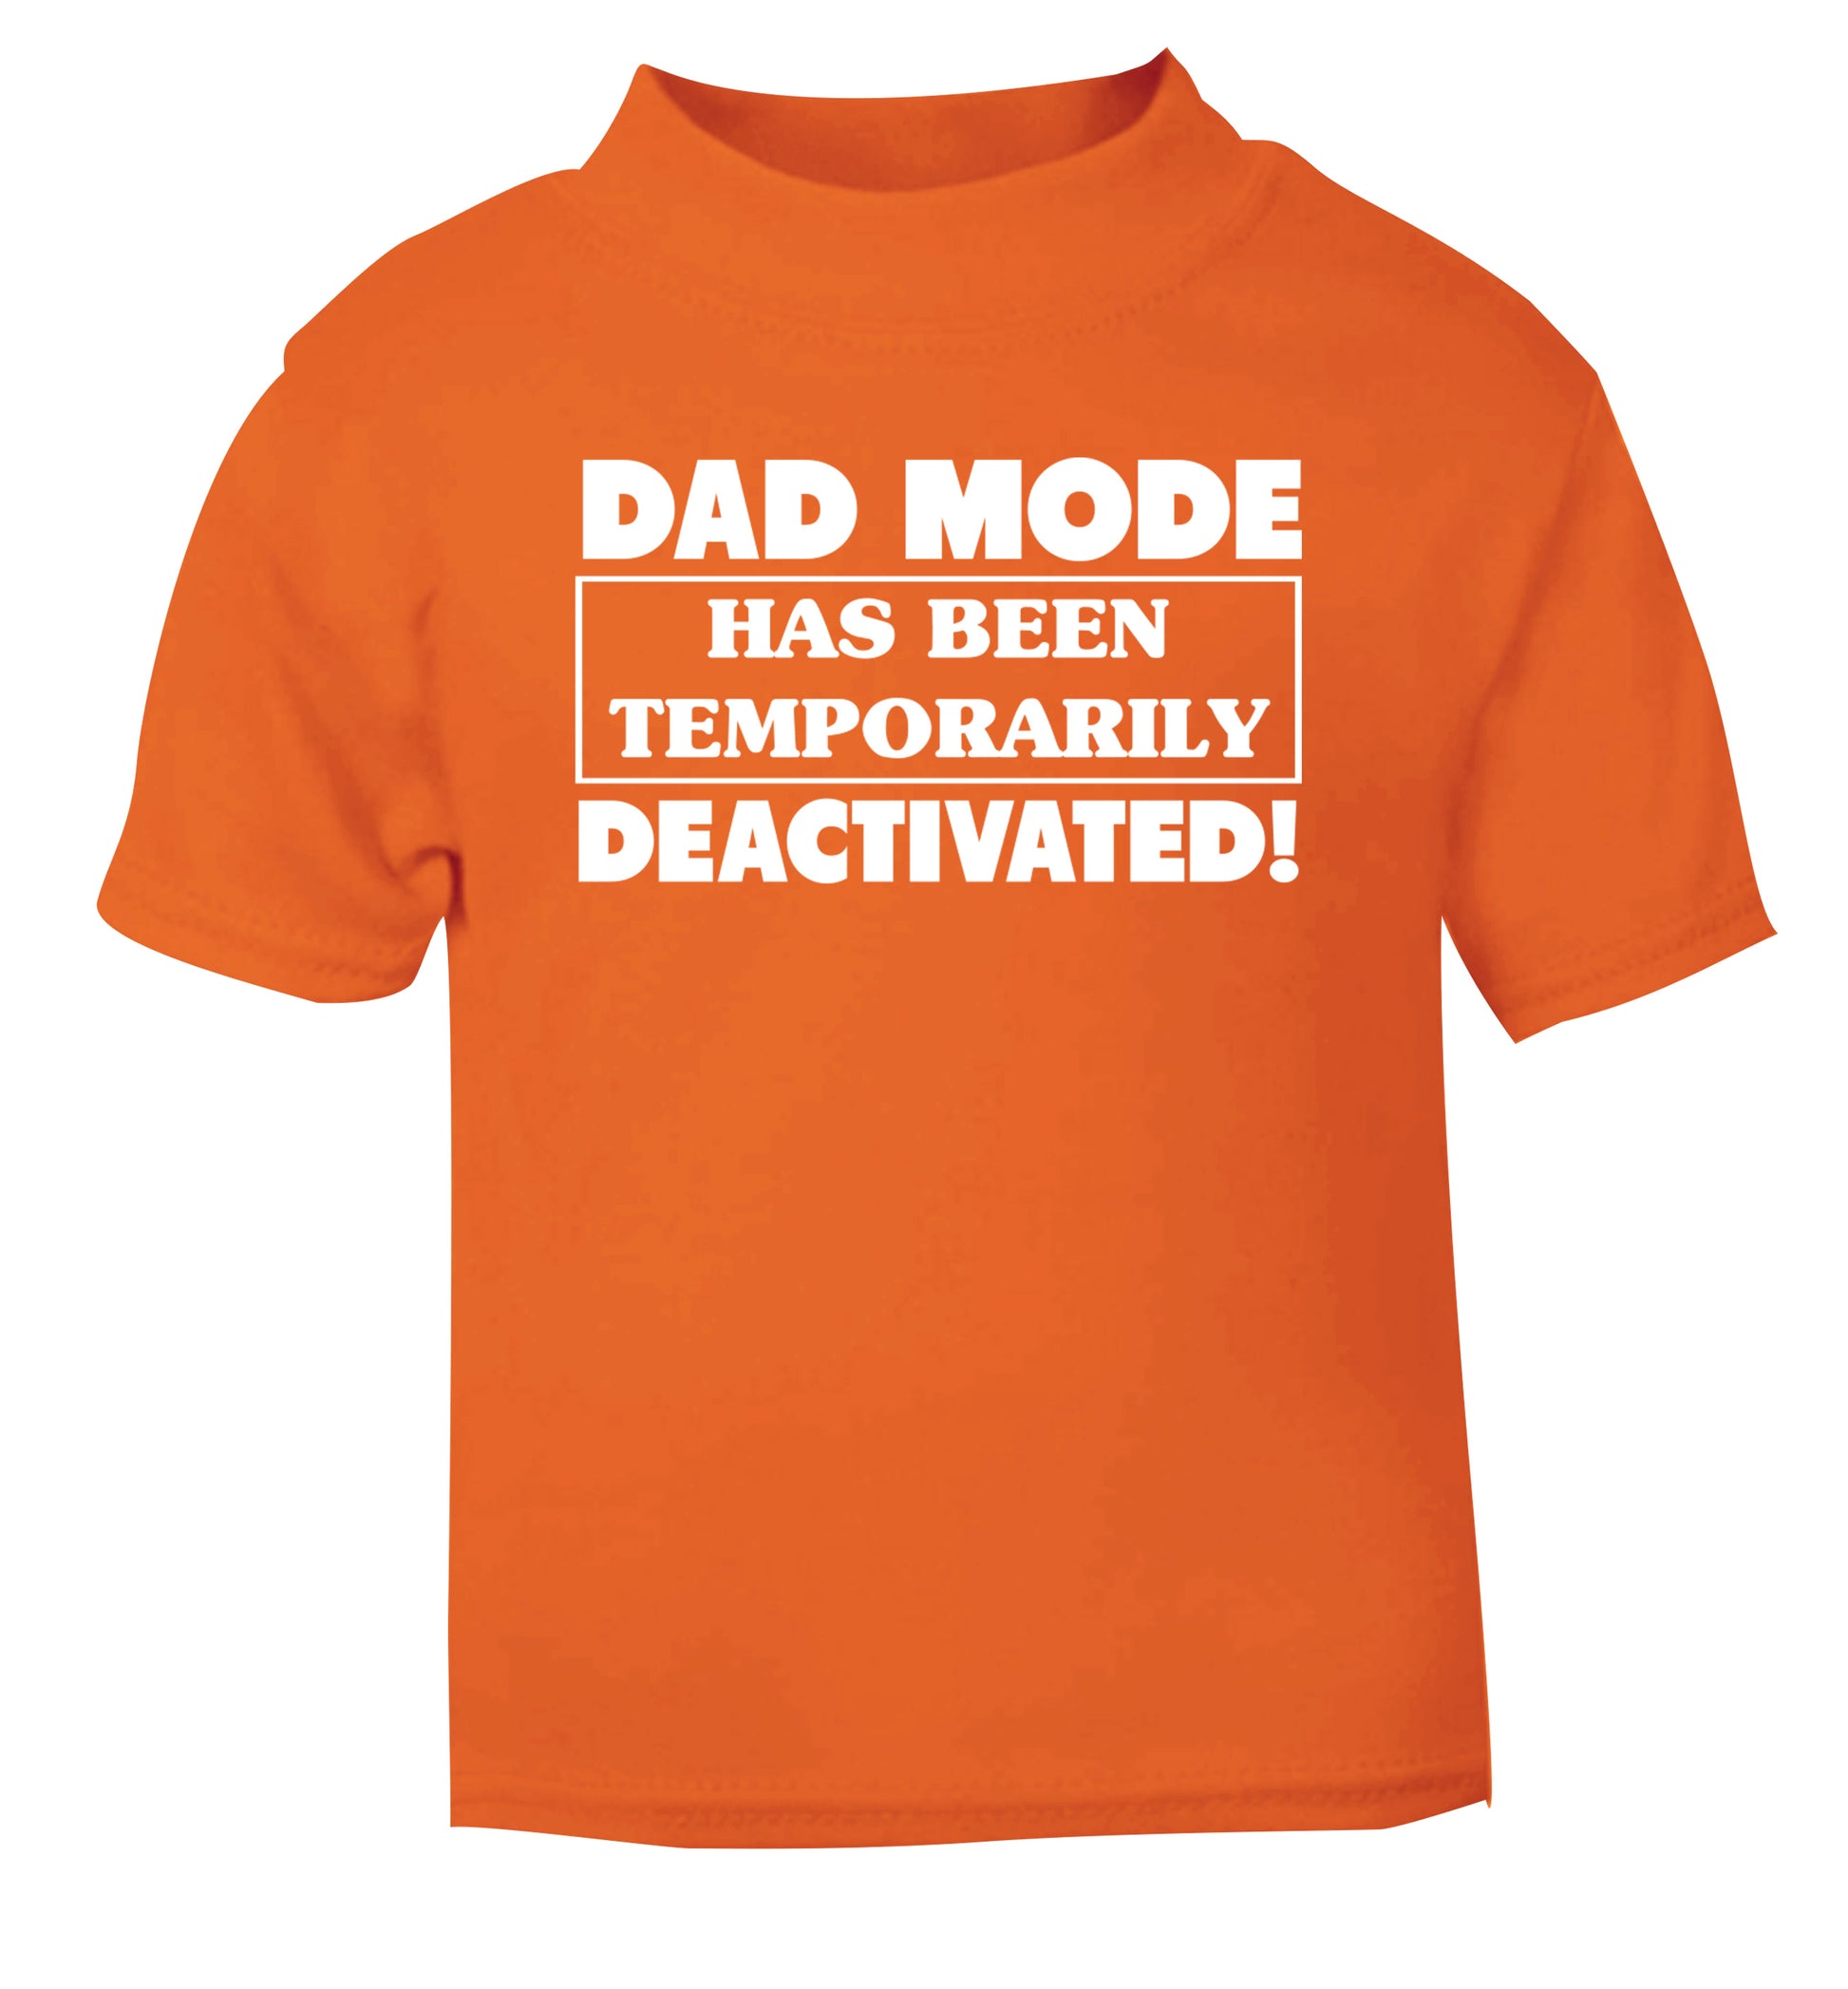 Dad mode has been temporarily deactivated! orange Baby Toddler Tshirt 2 Years